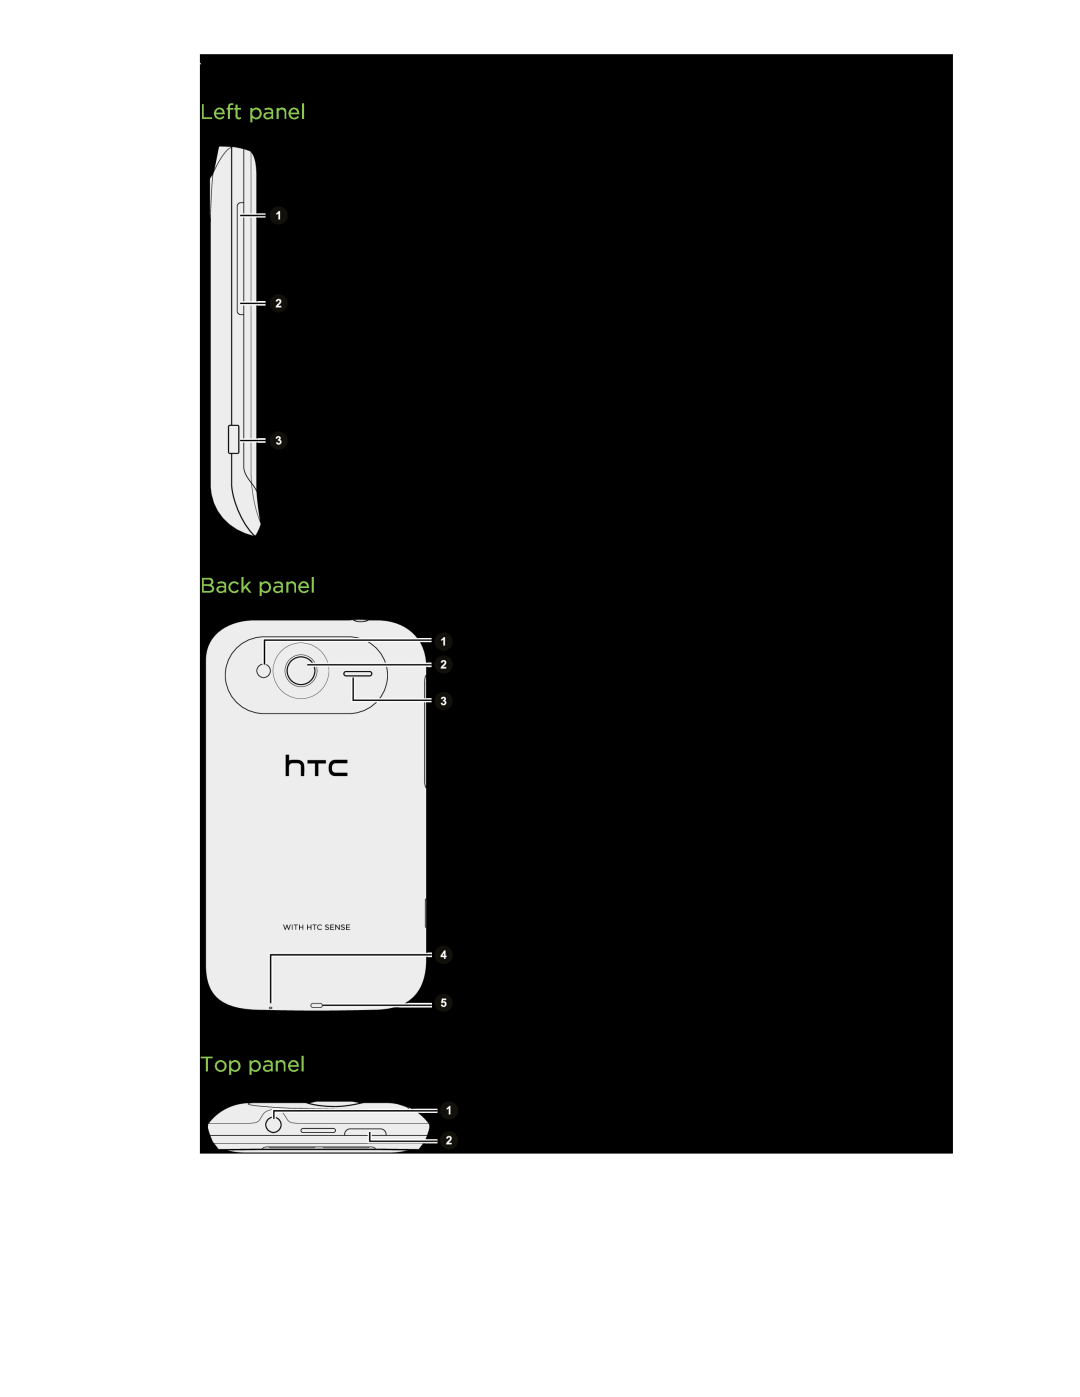 HTC manual Left panel, Back panel, Top panel, VOLUME UP 2. VOLUME DOWN 3. USB connector, Lanyard hole, Getting started 